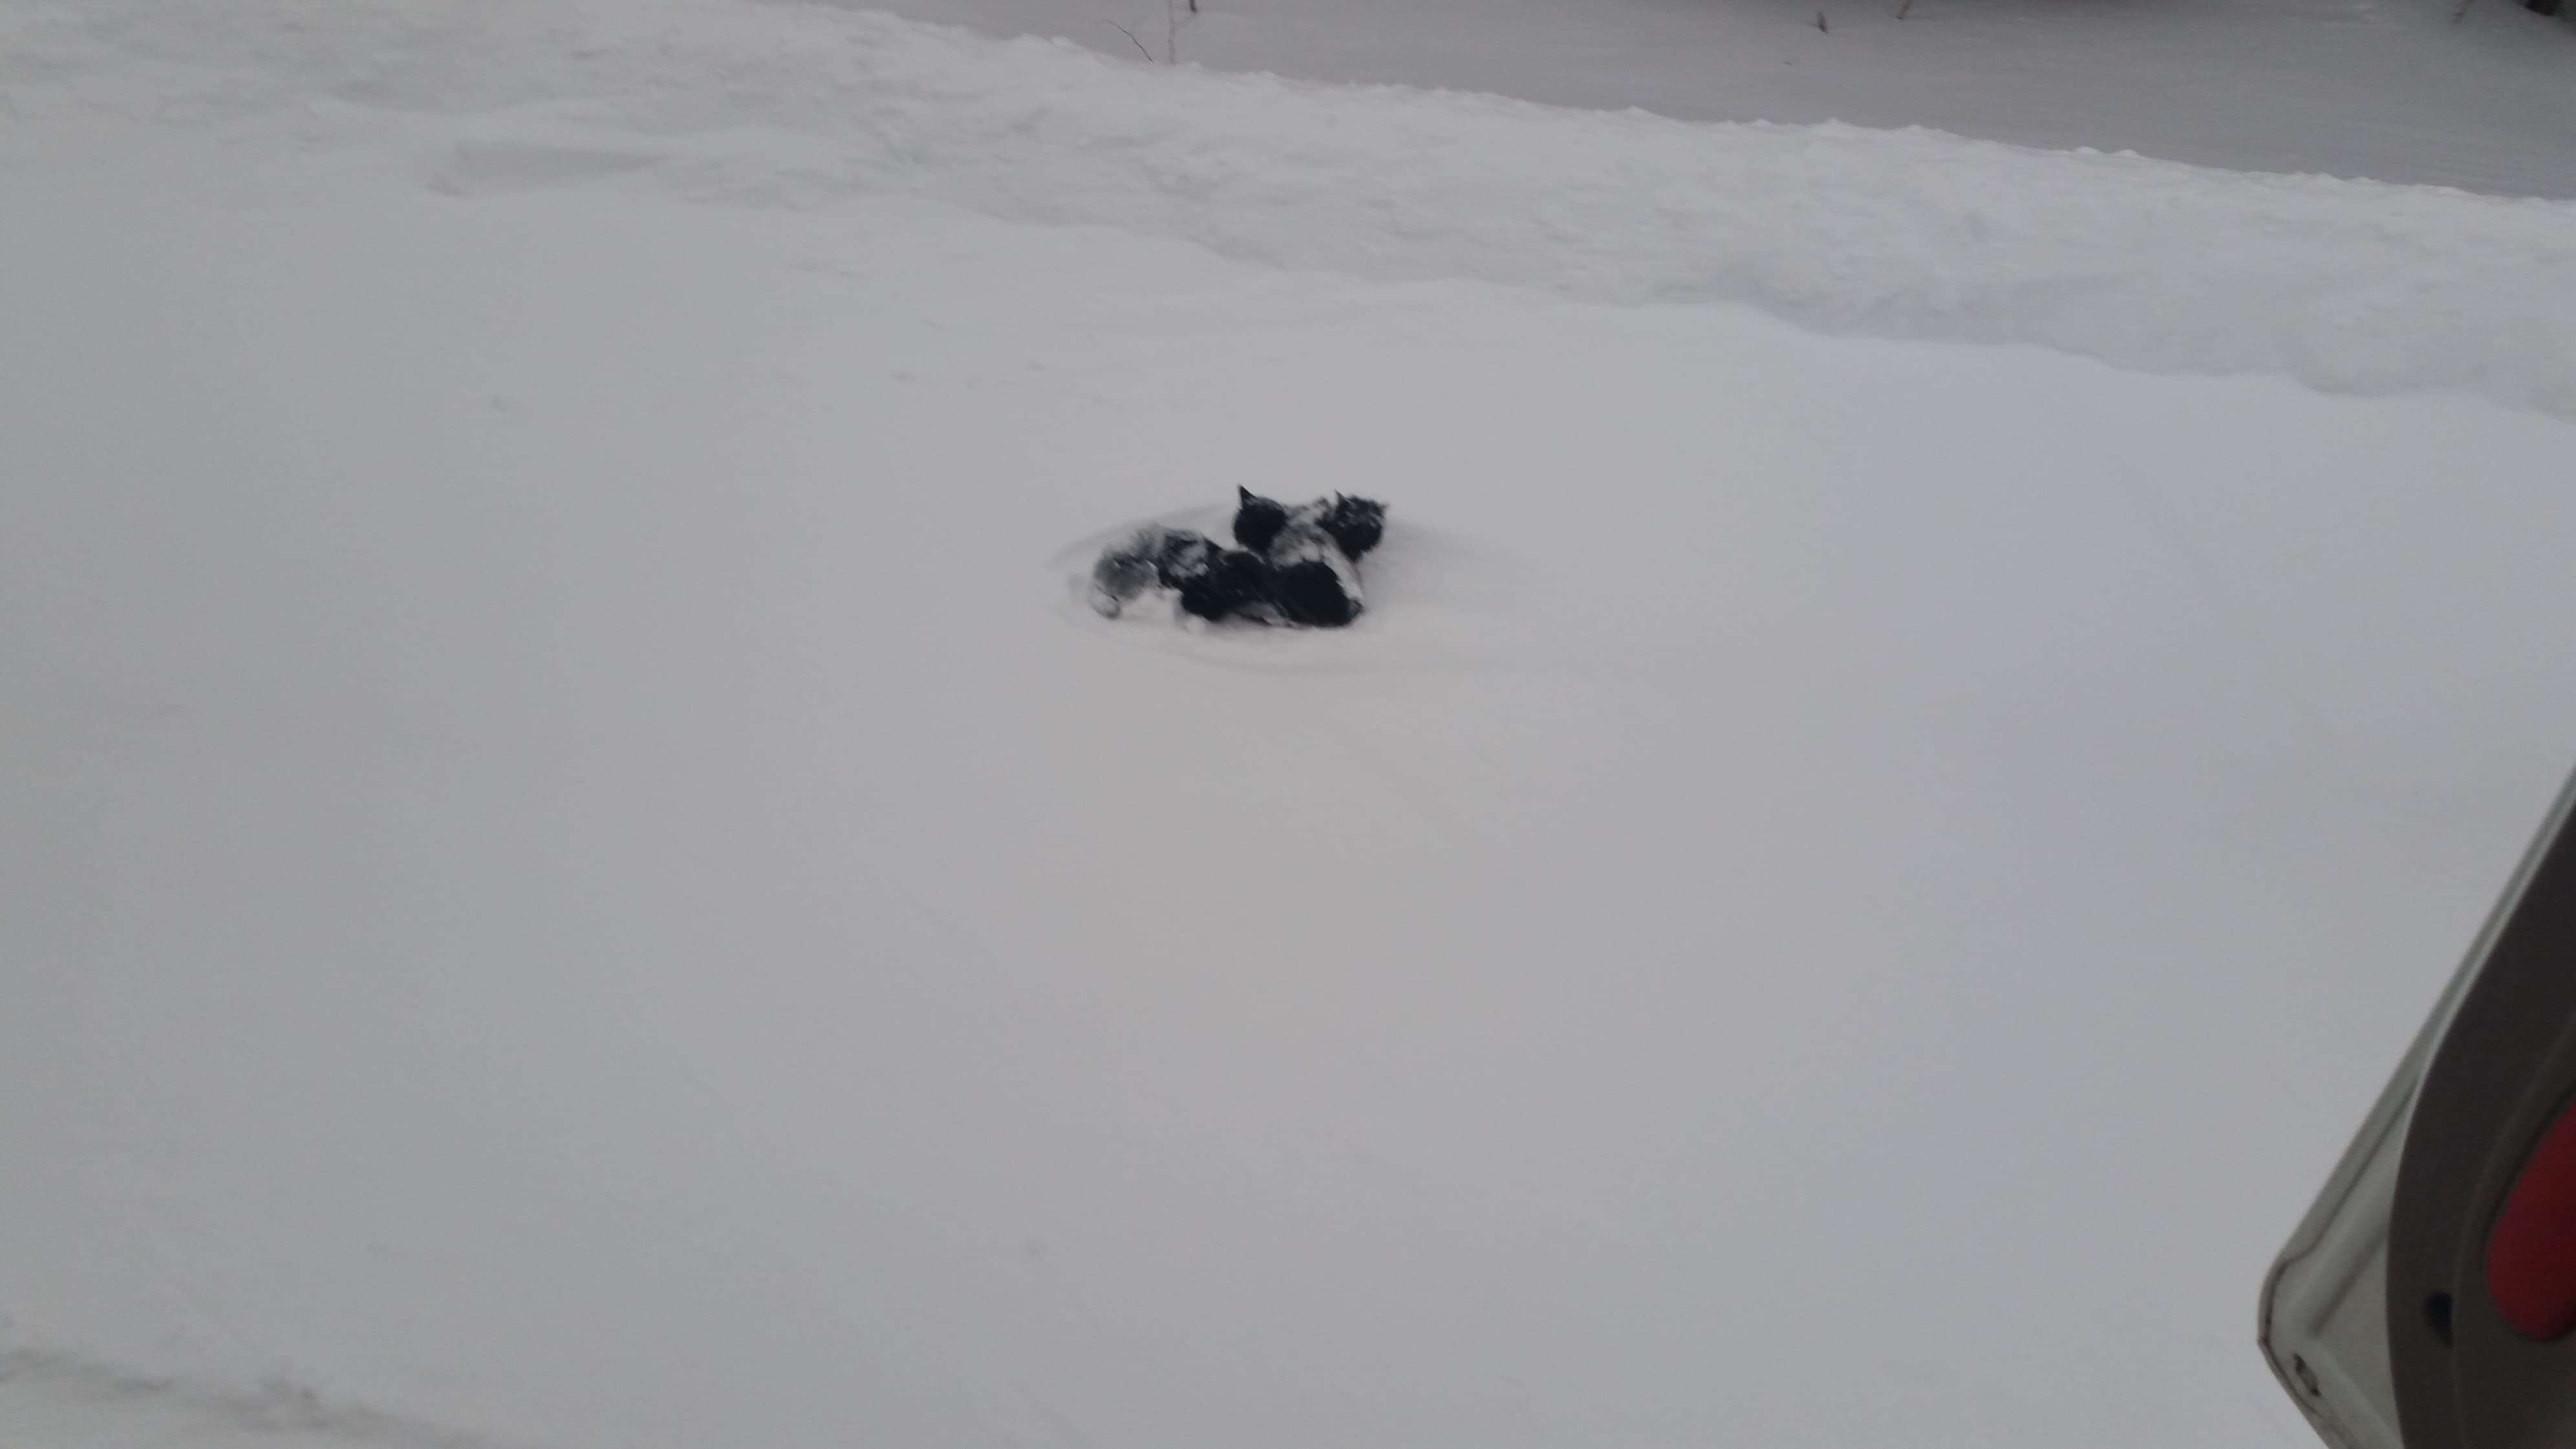 Black kittens abandoned in snowstorm